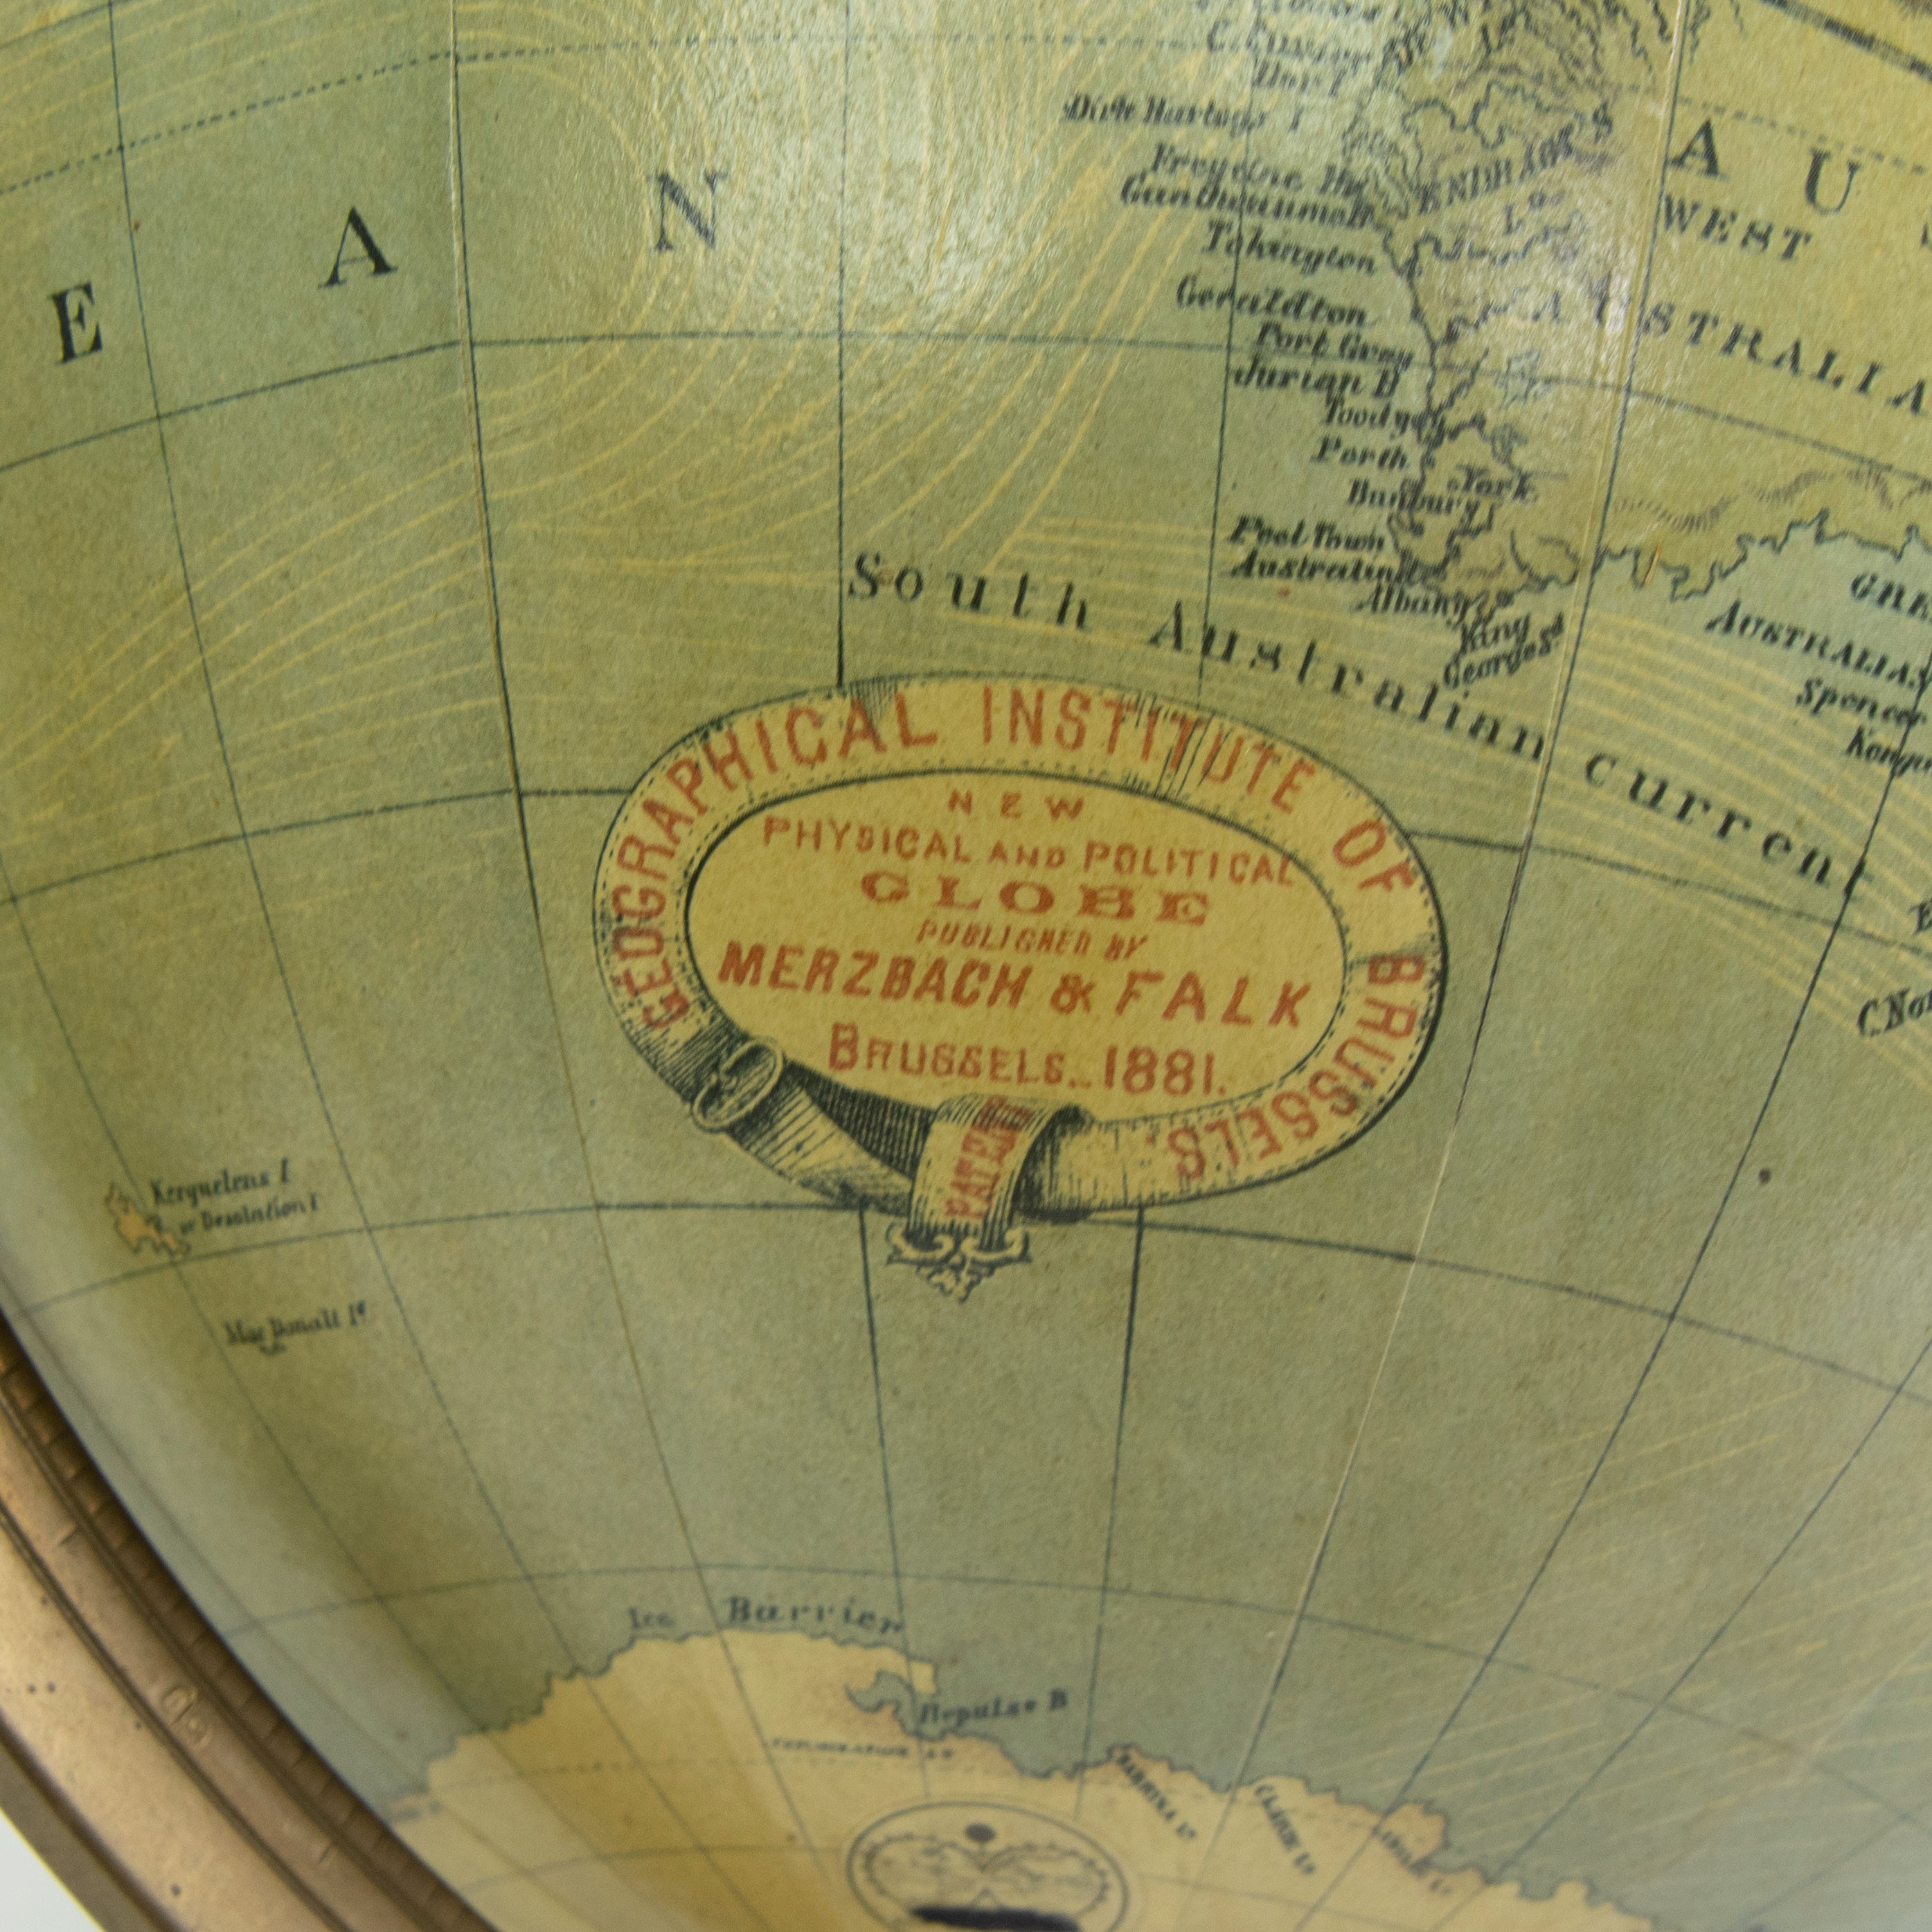 Vintage Merzbach and Falk physical and Political globe on stand, Geographical Institute of Brussels - Image 6 of 7